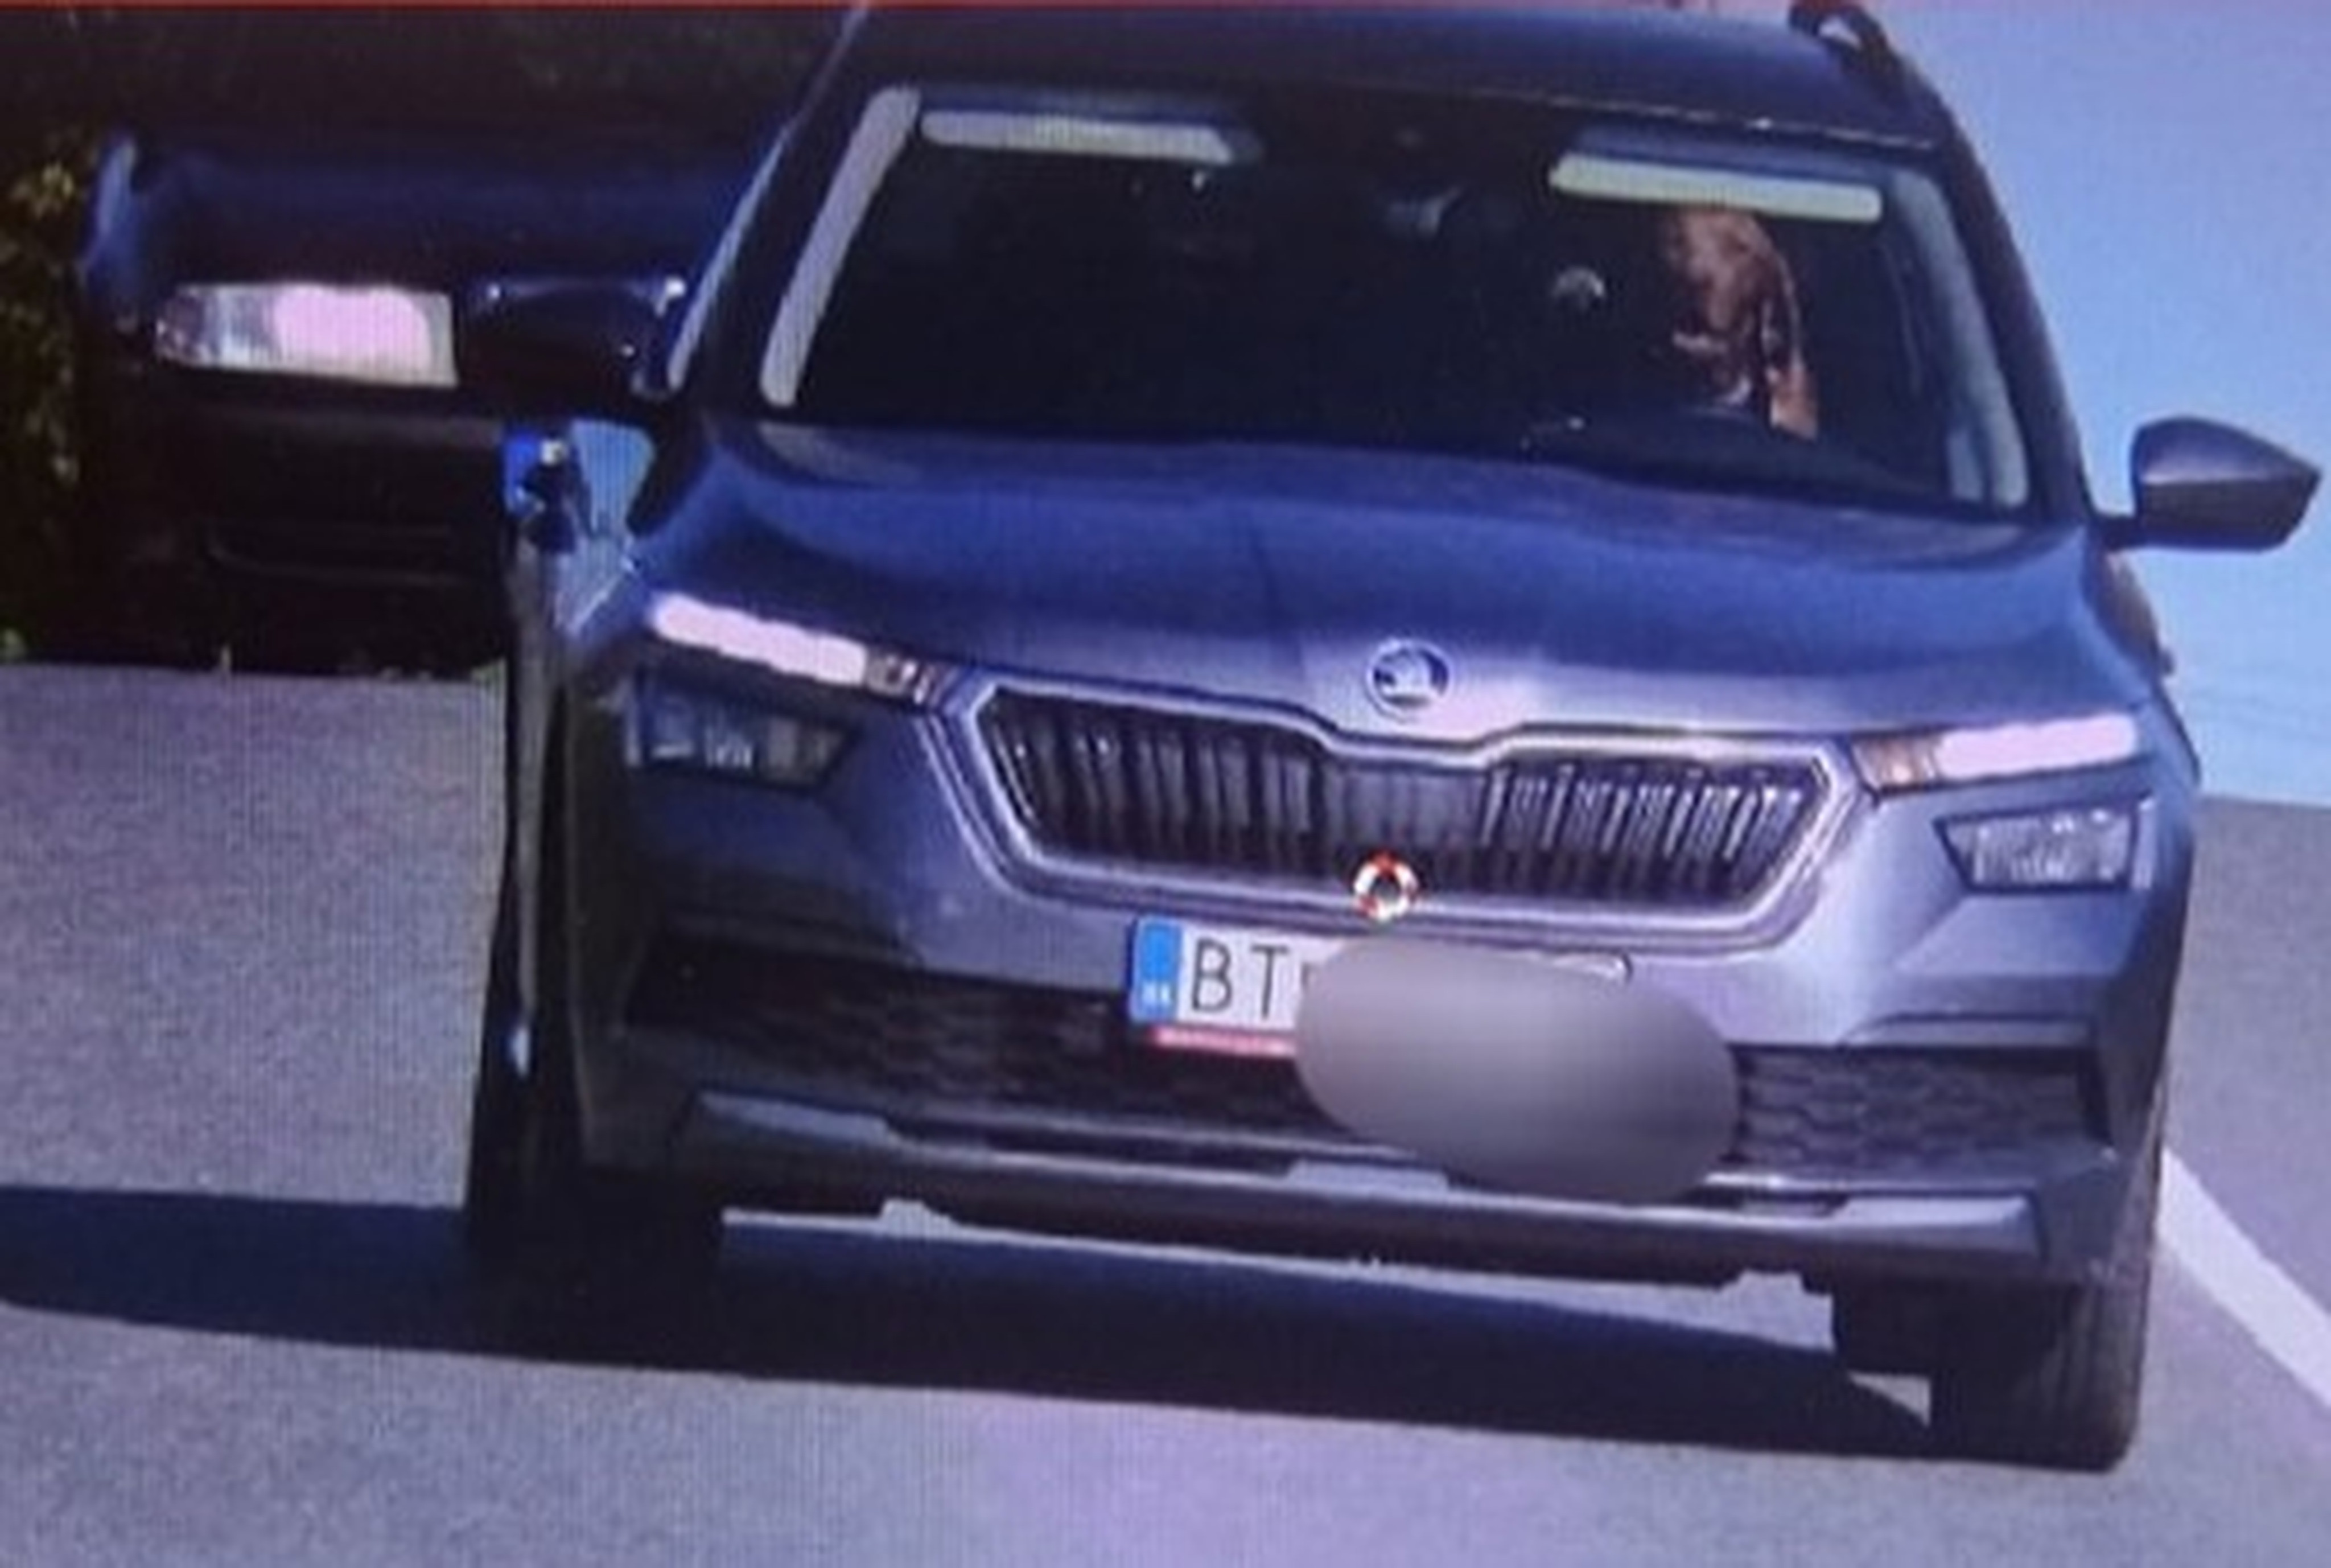 Police in Slovakia have fined the owner of a car after a speed camera appeared to show a dog at the wheel. Photo: Facebook@ Polícia Slovenskej republiky